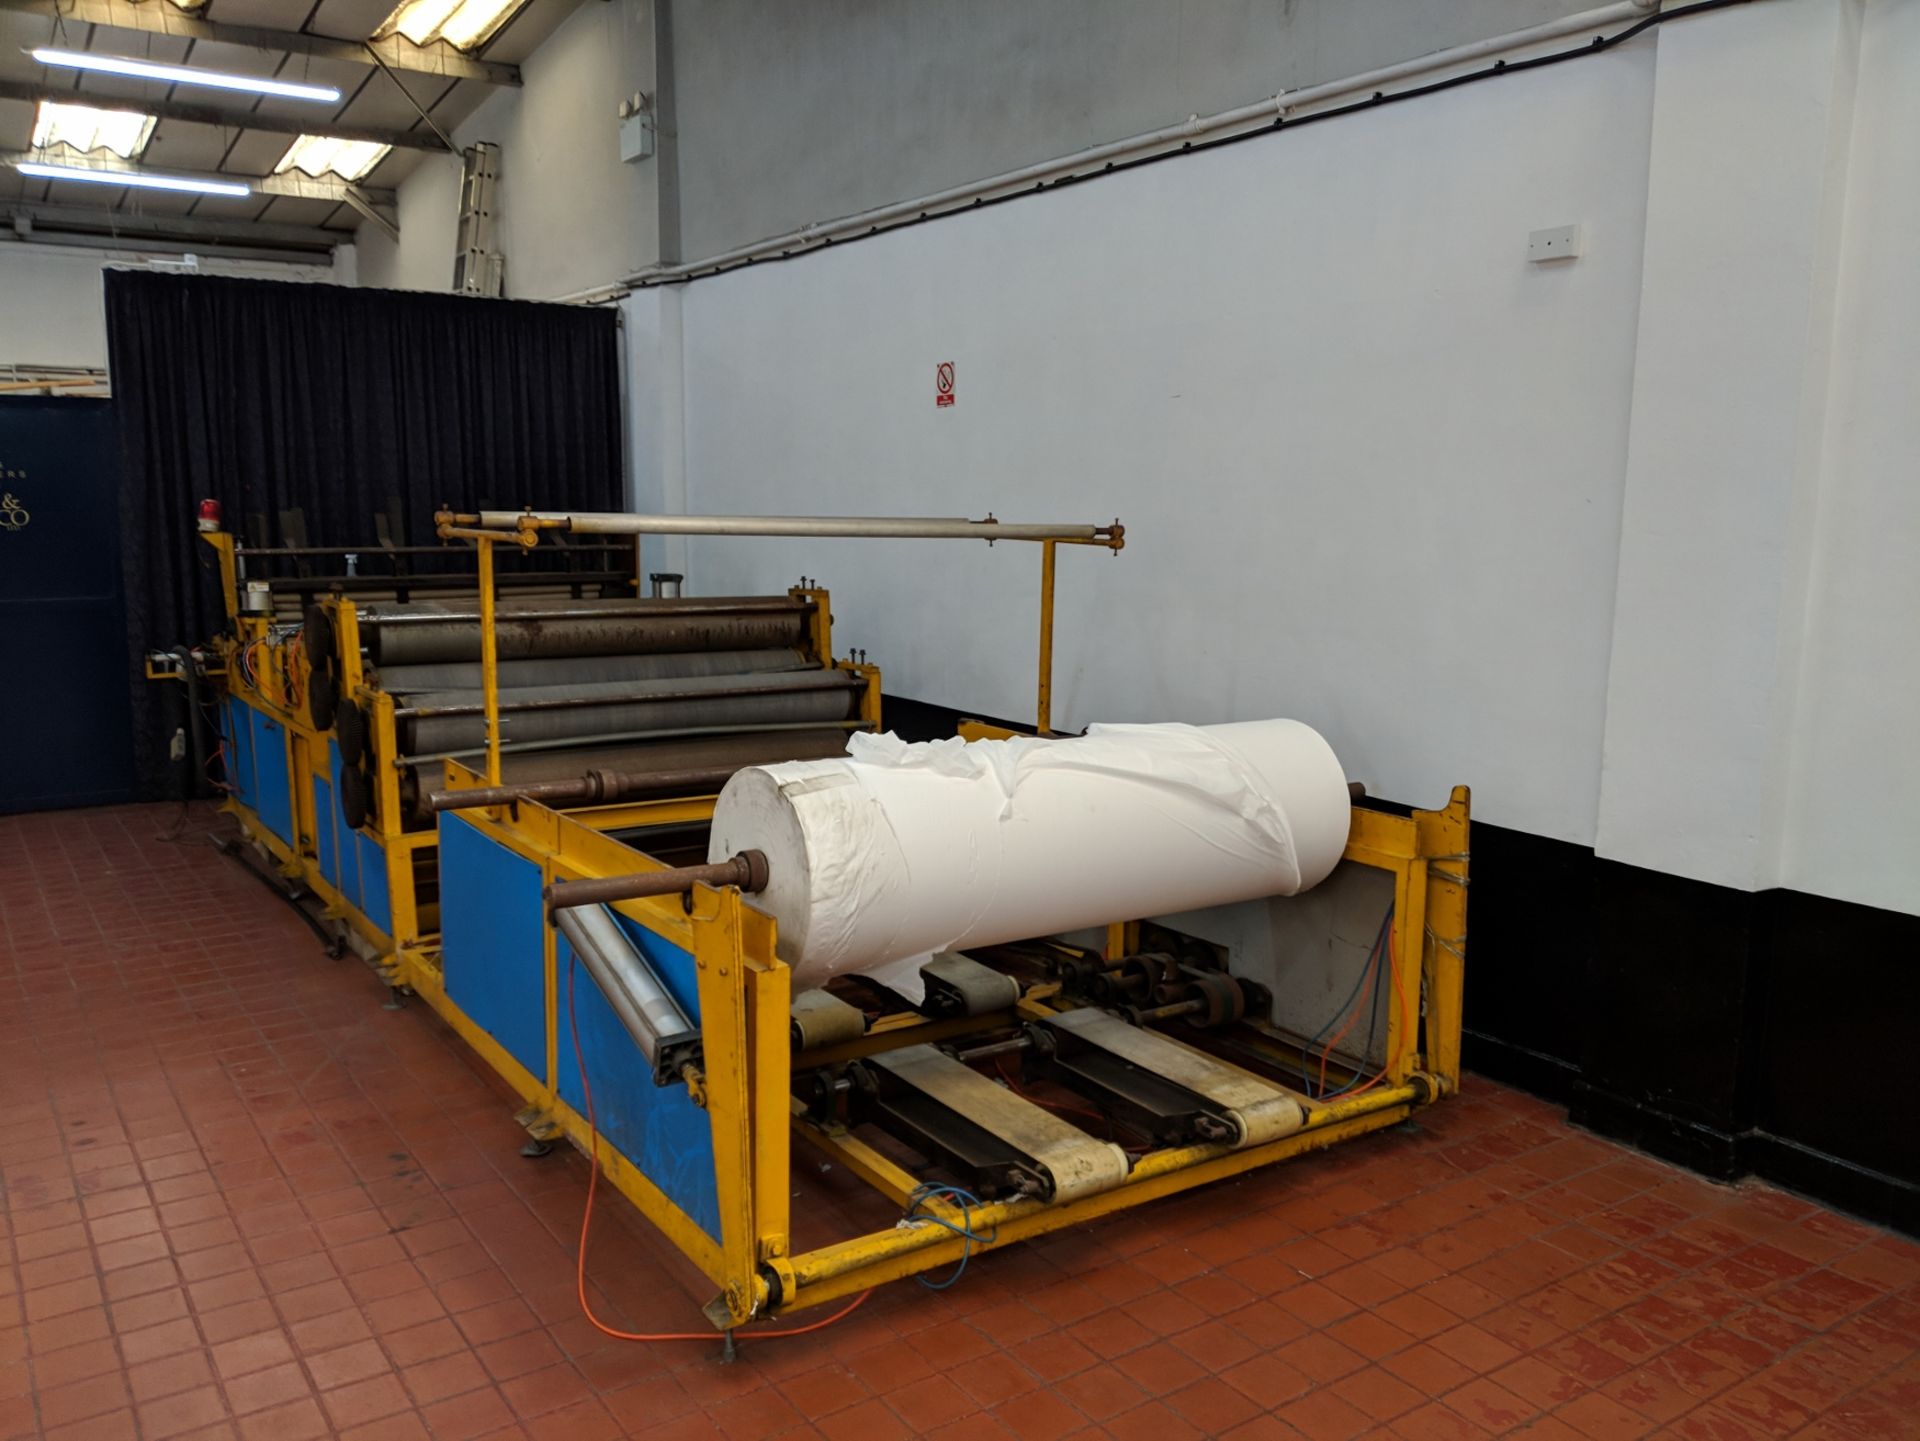 Large toilet tissue manufacturing machine comprising several modular components which as pictured